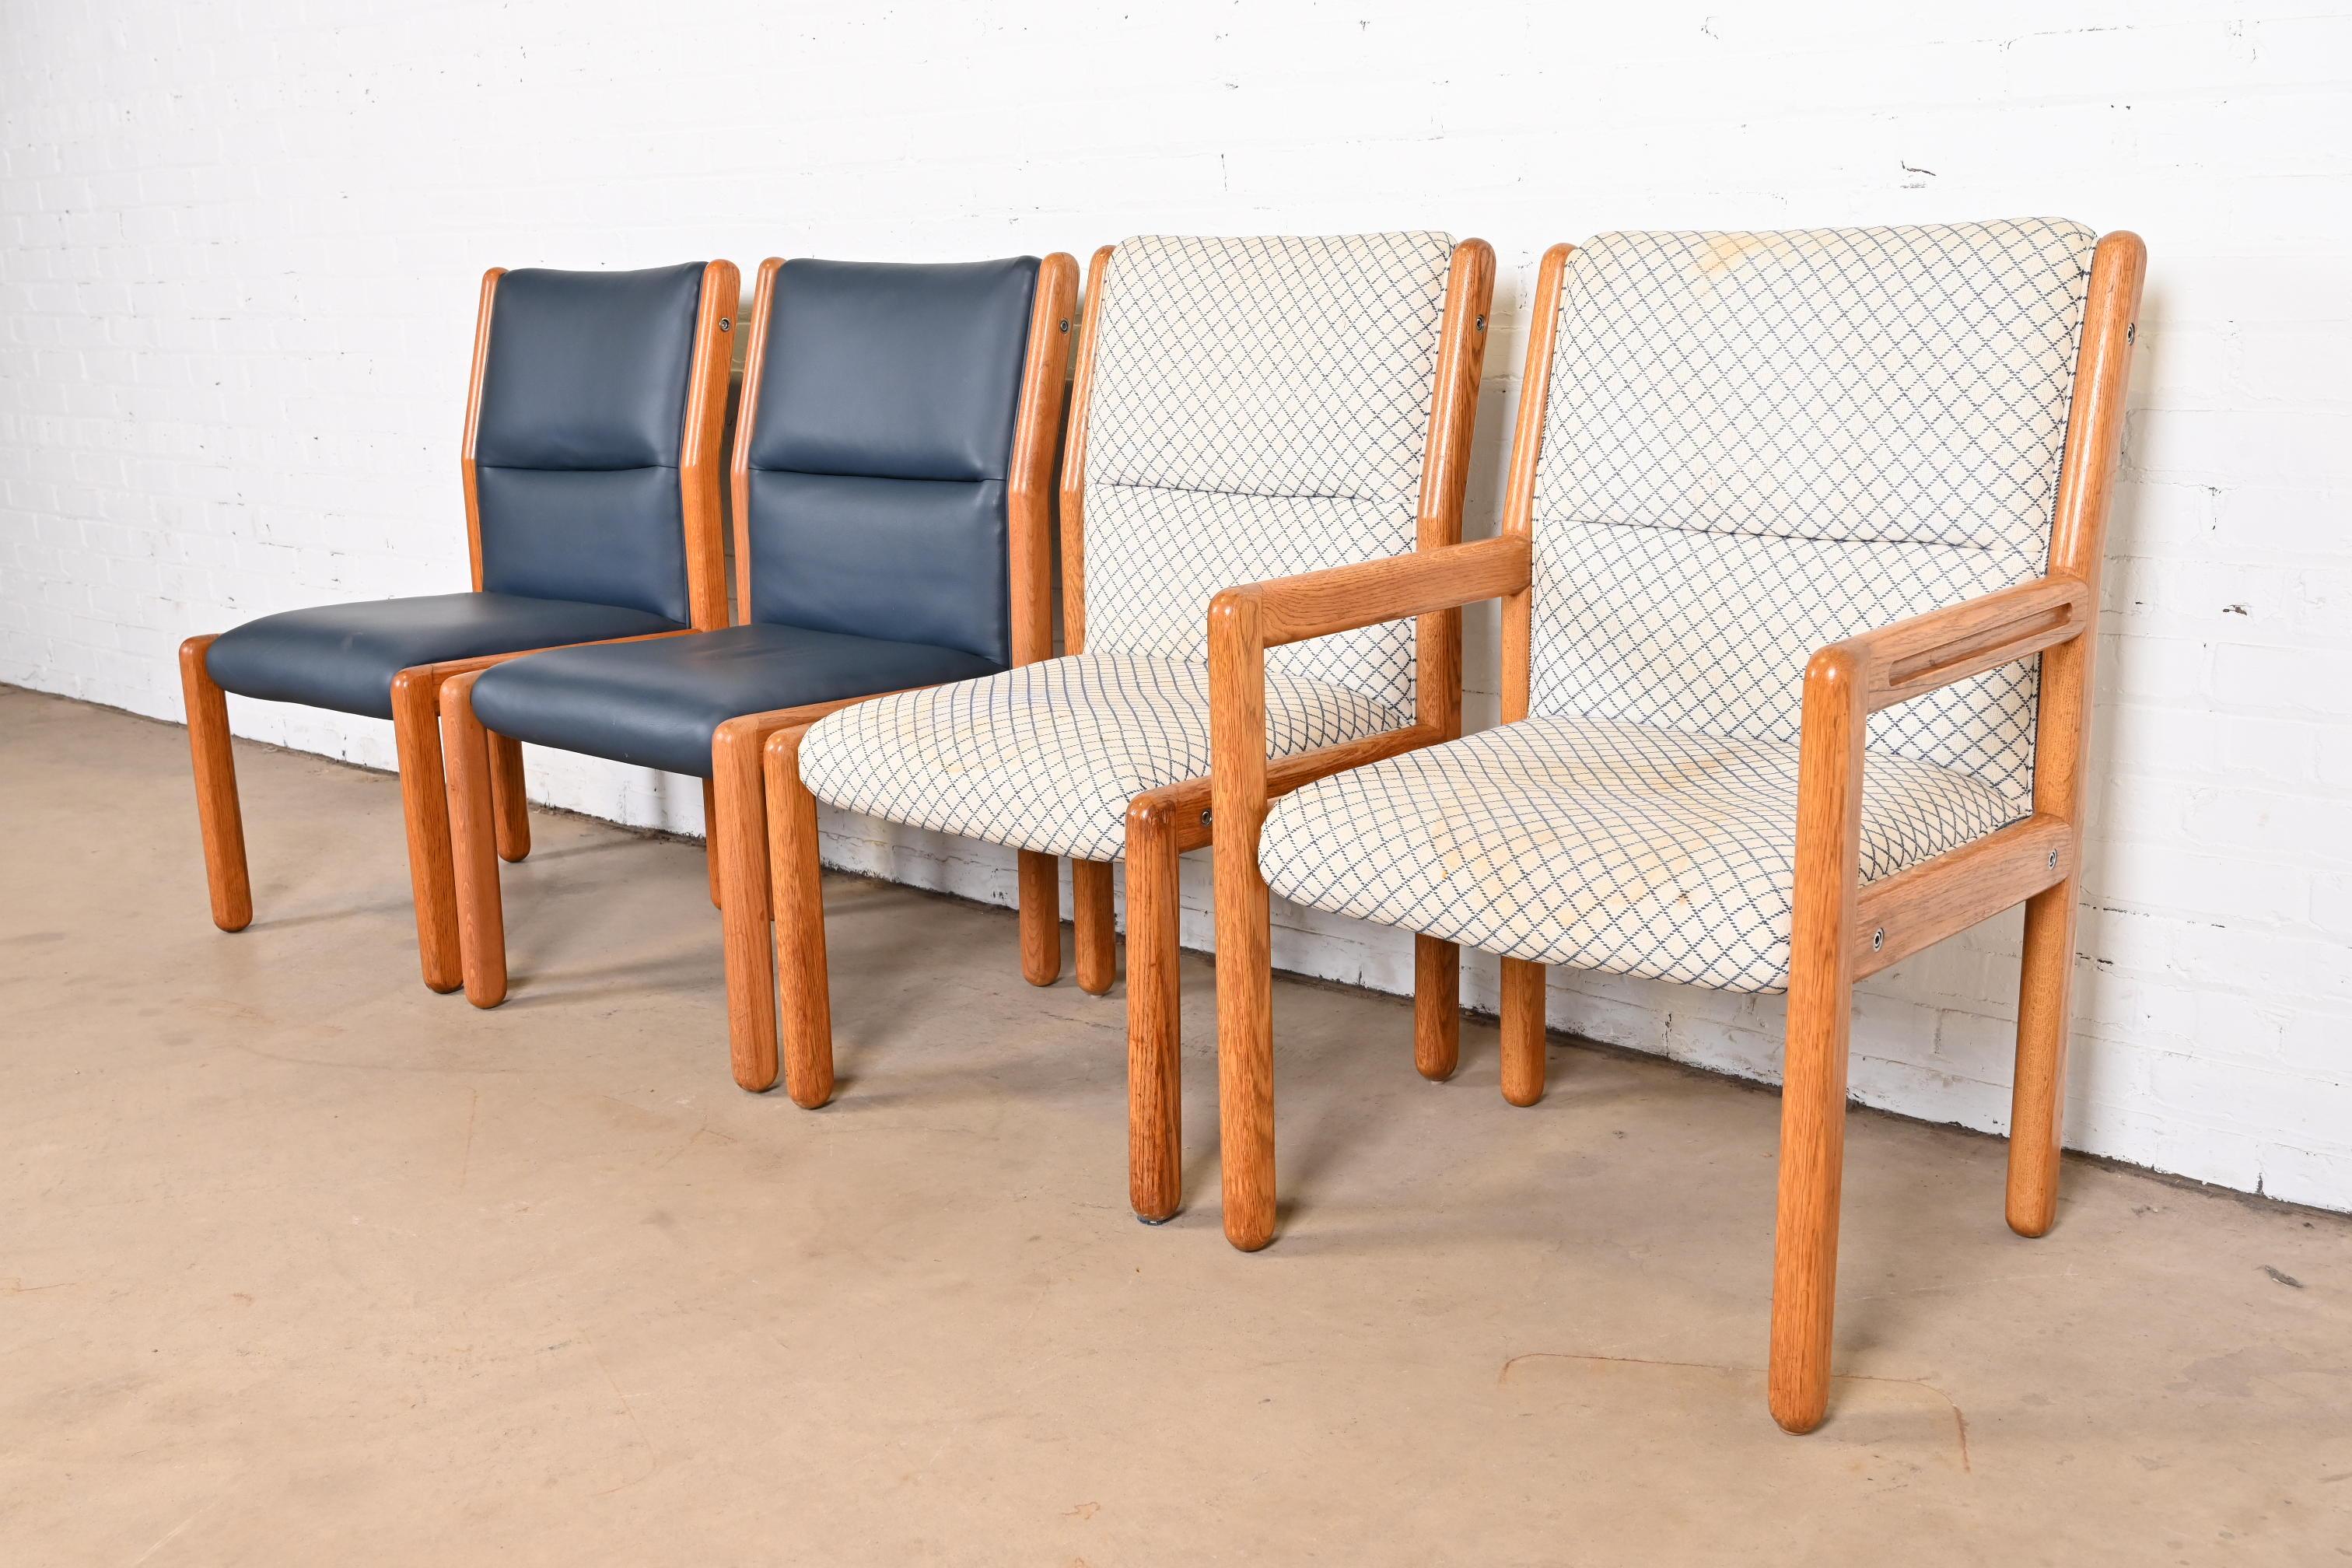 Dunbar Mid-Century Modern Solid Oak Dining Chairs, Set of Four In Good Condition For Sale In South Bend, IN